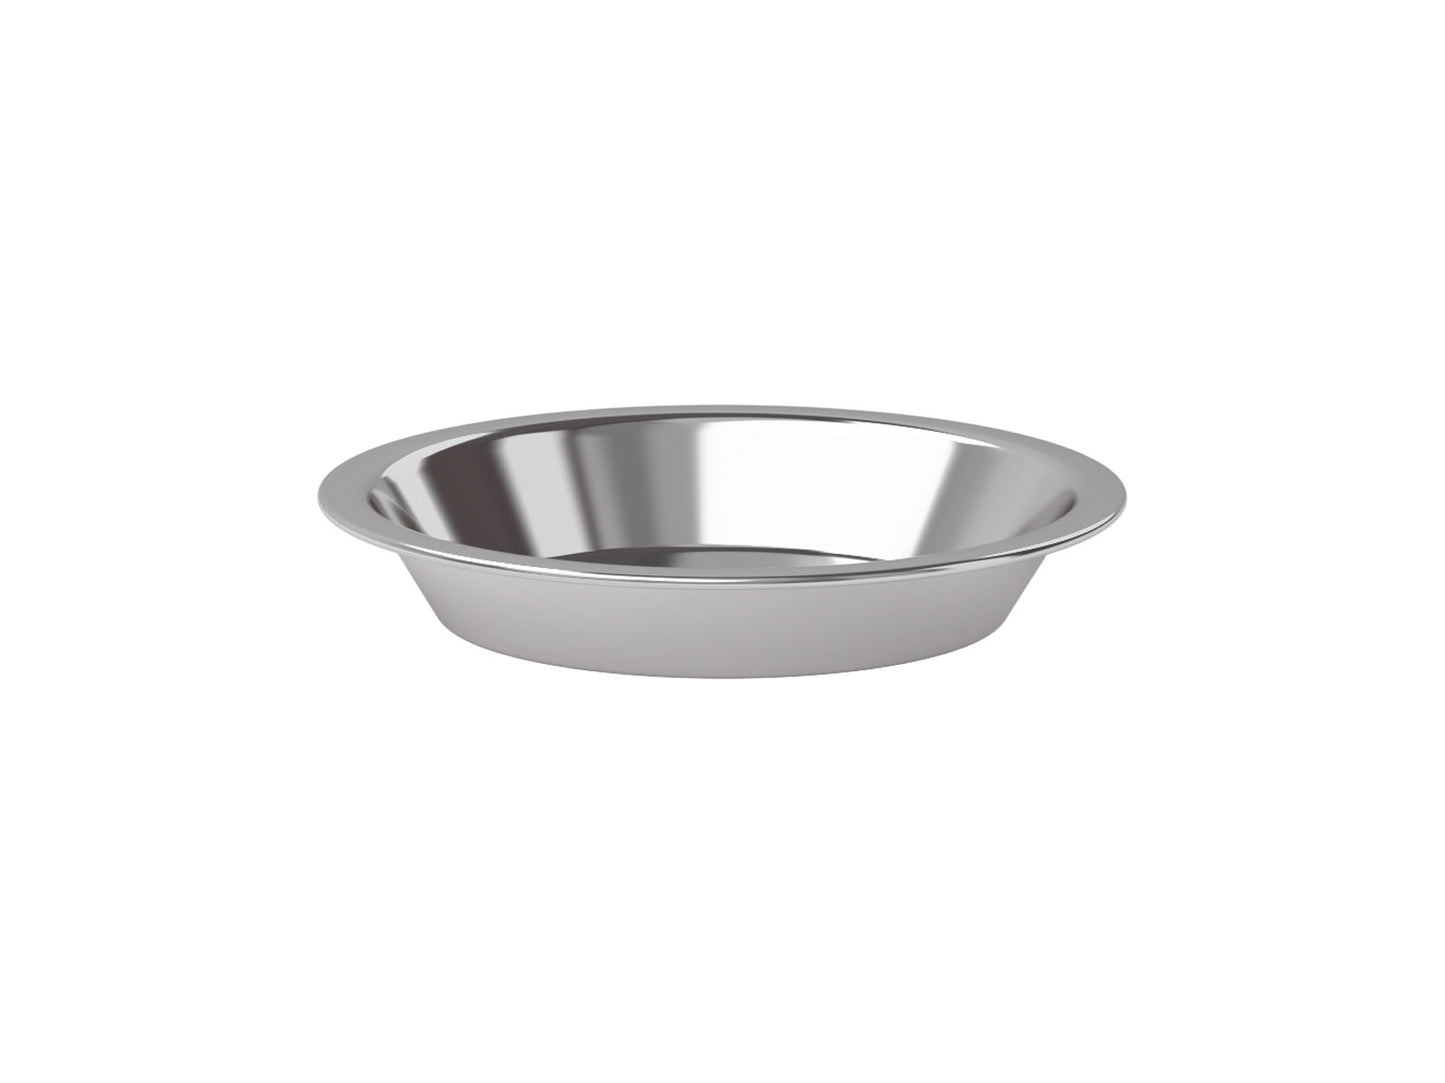 Stainless steel bowl for catBar®